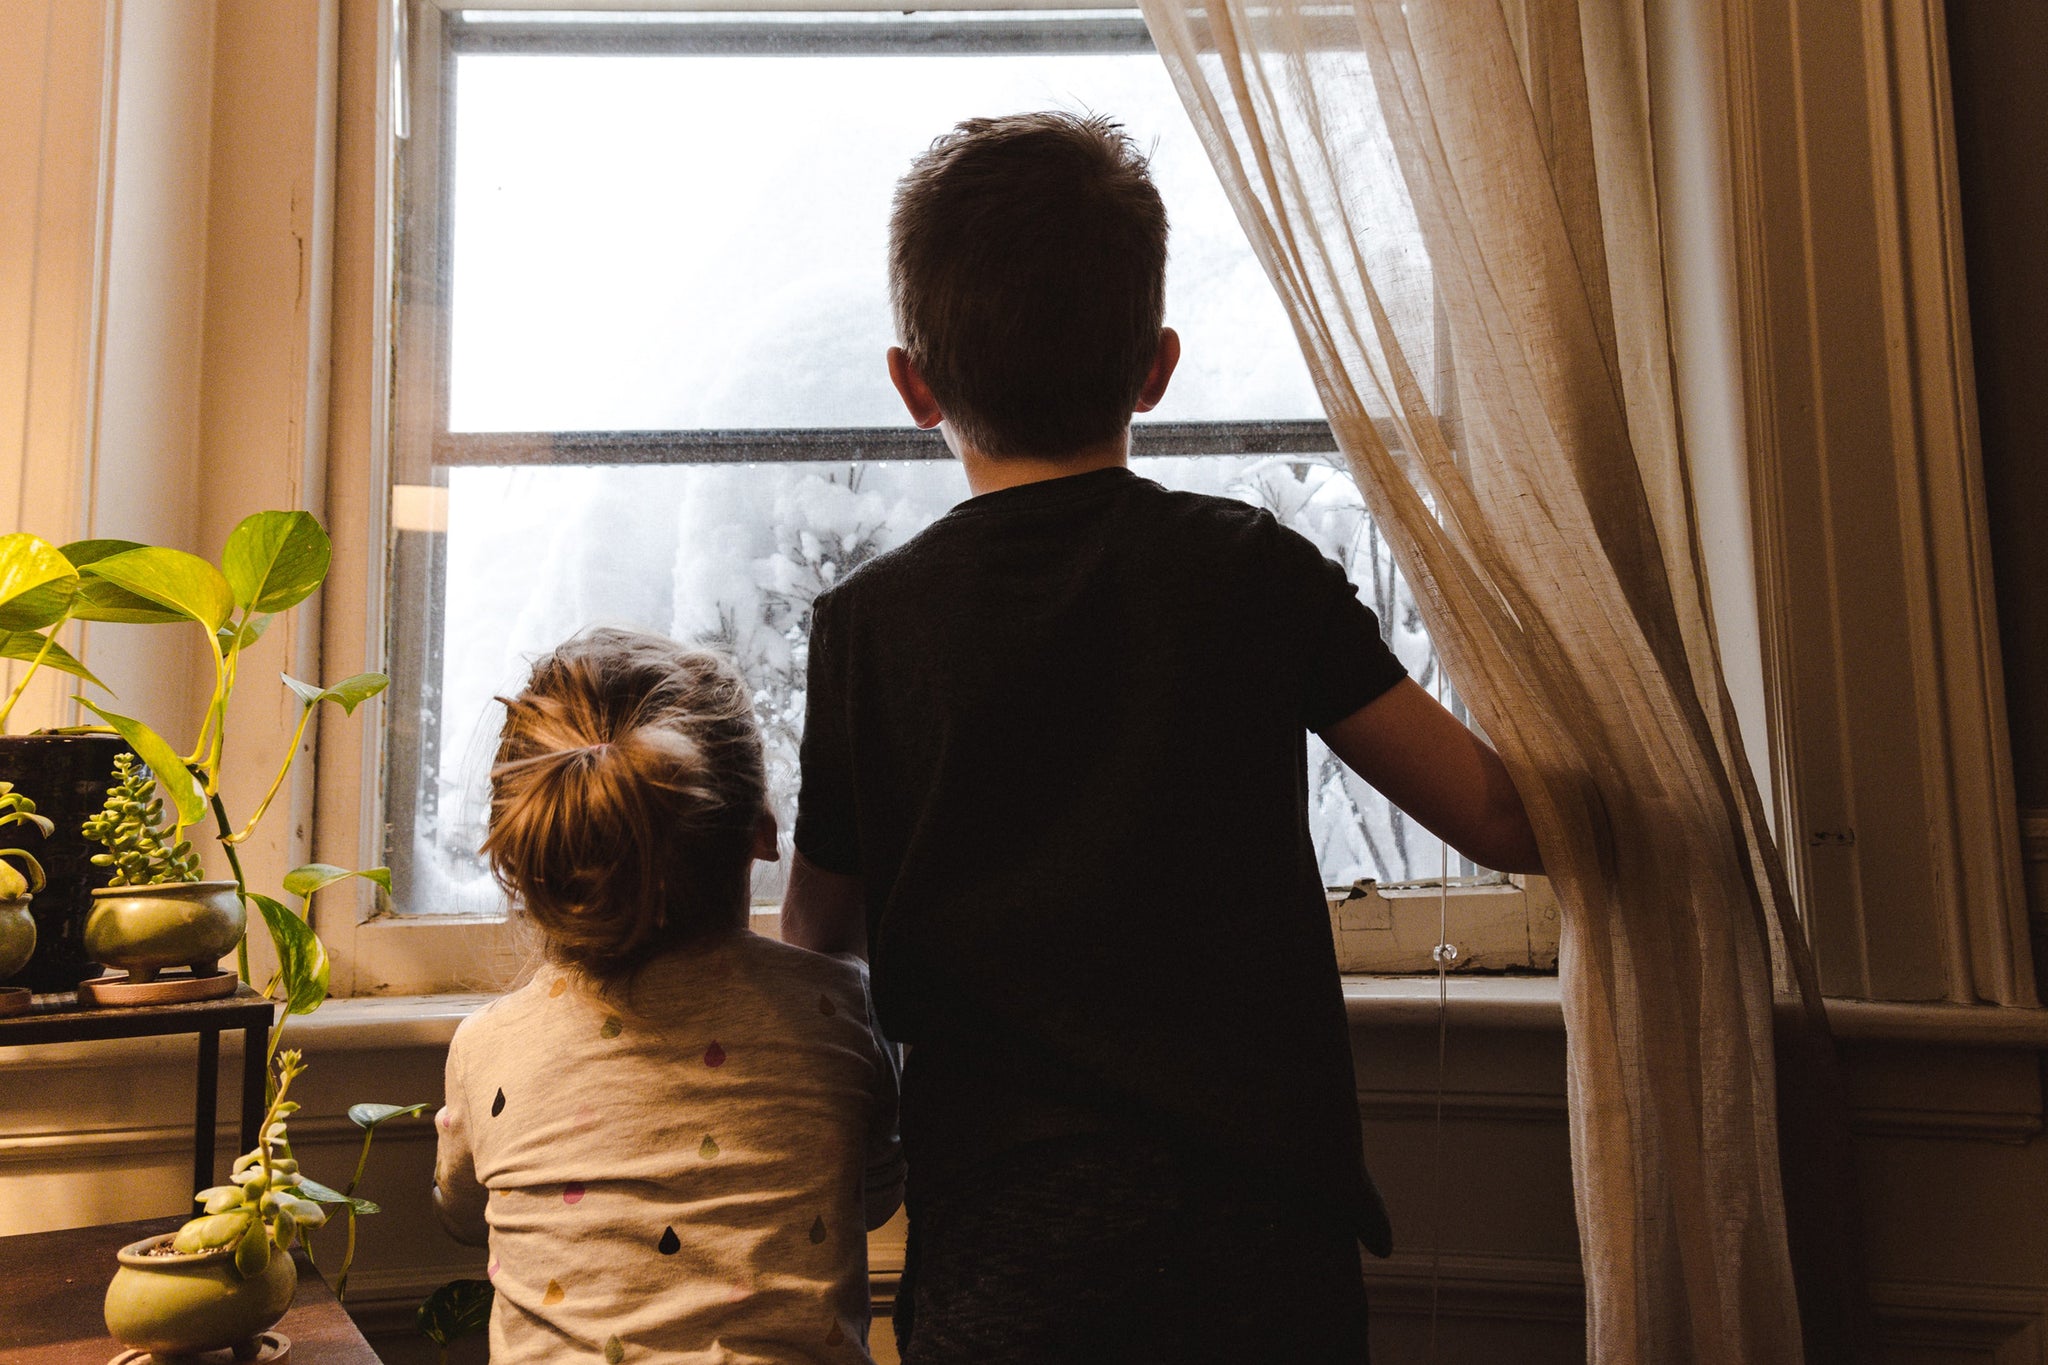 The evidence linking indoor air pollution and respiratory problems in children